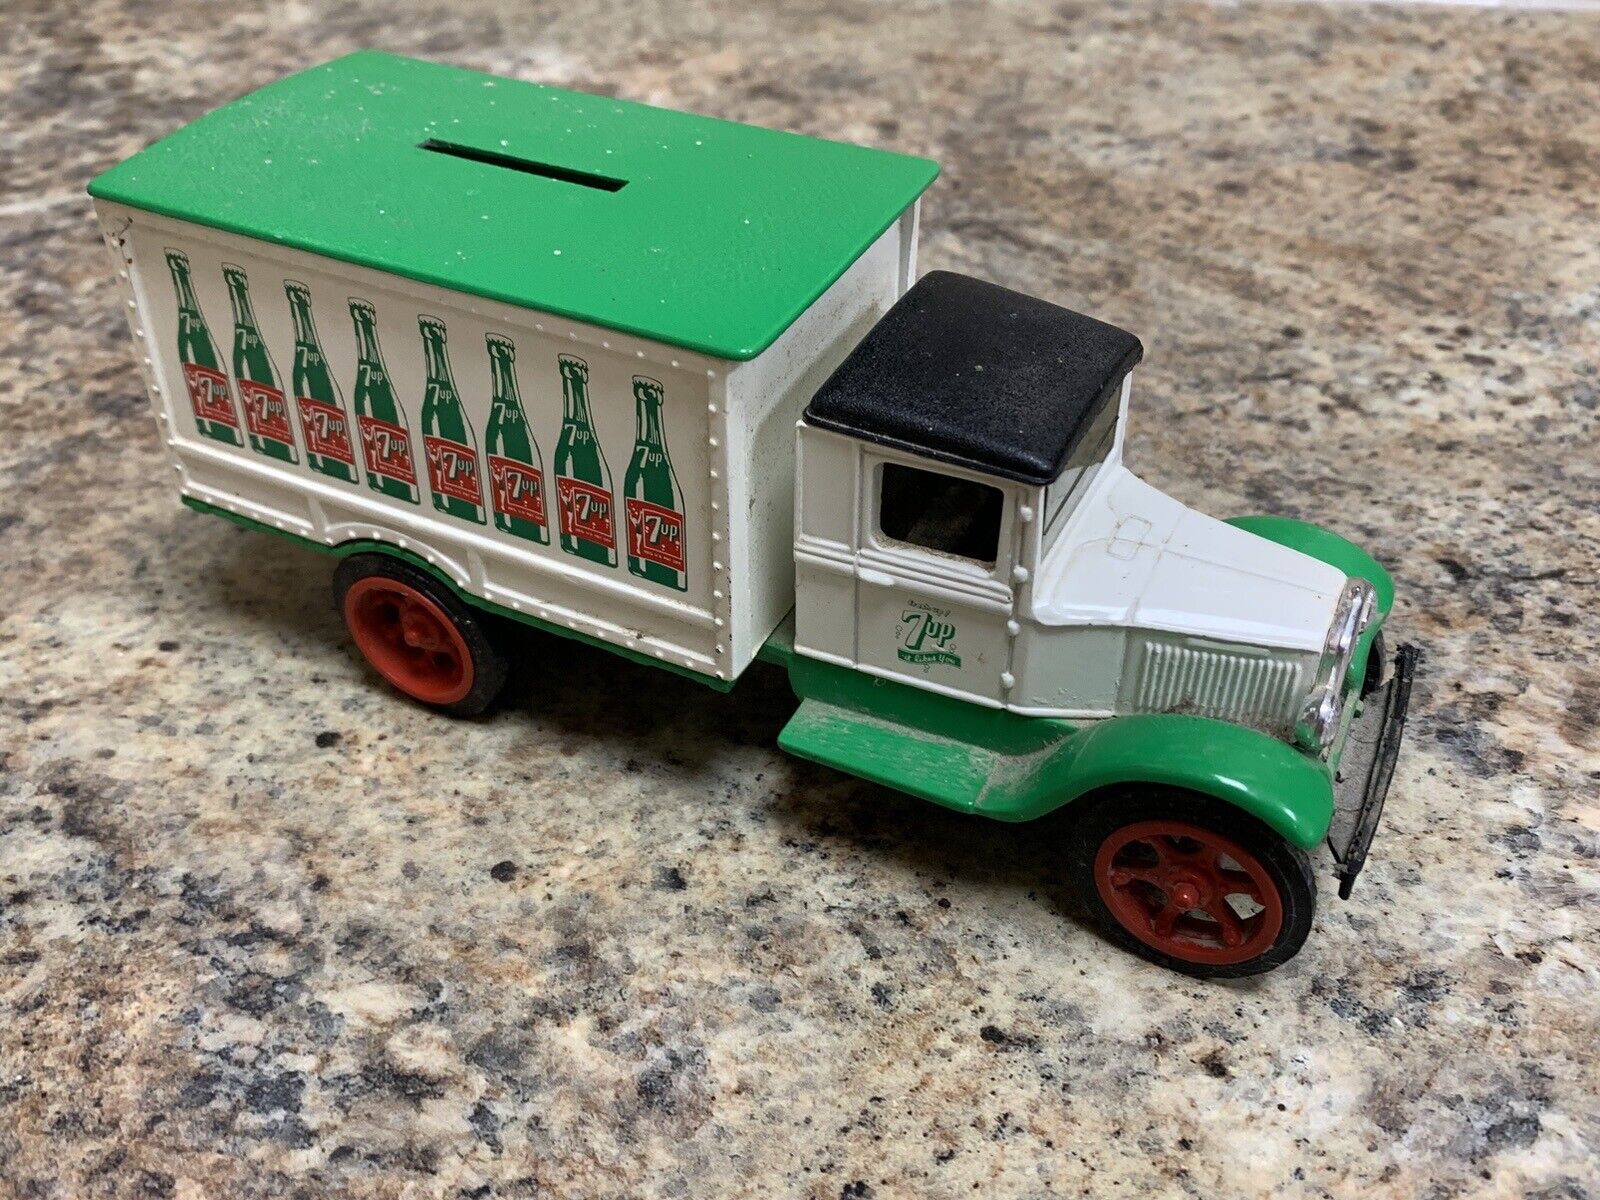 VINTAGE DIECAST ERTL 1931 HAWKEYE 7UP DELIVERY TRUCK BANK WITH KEY (15D)